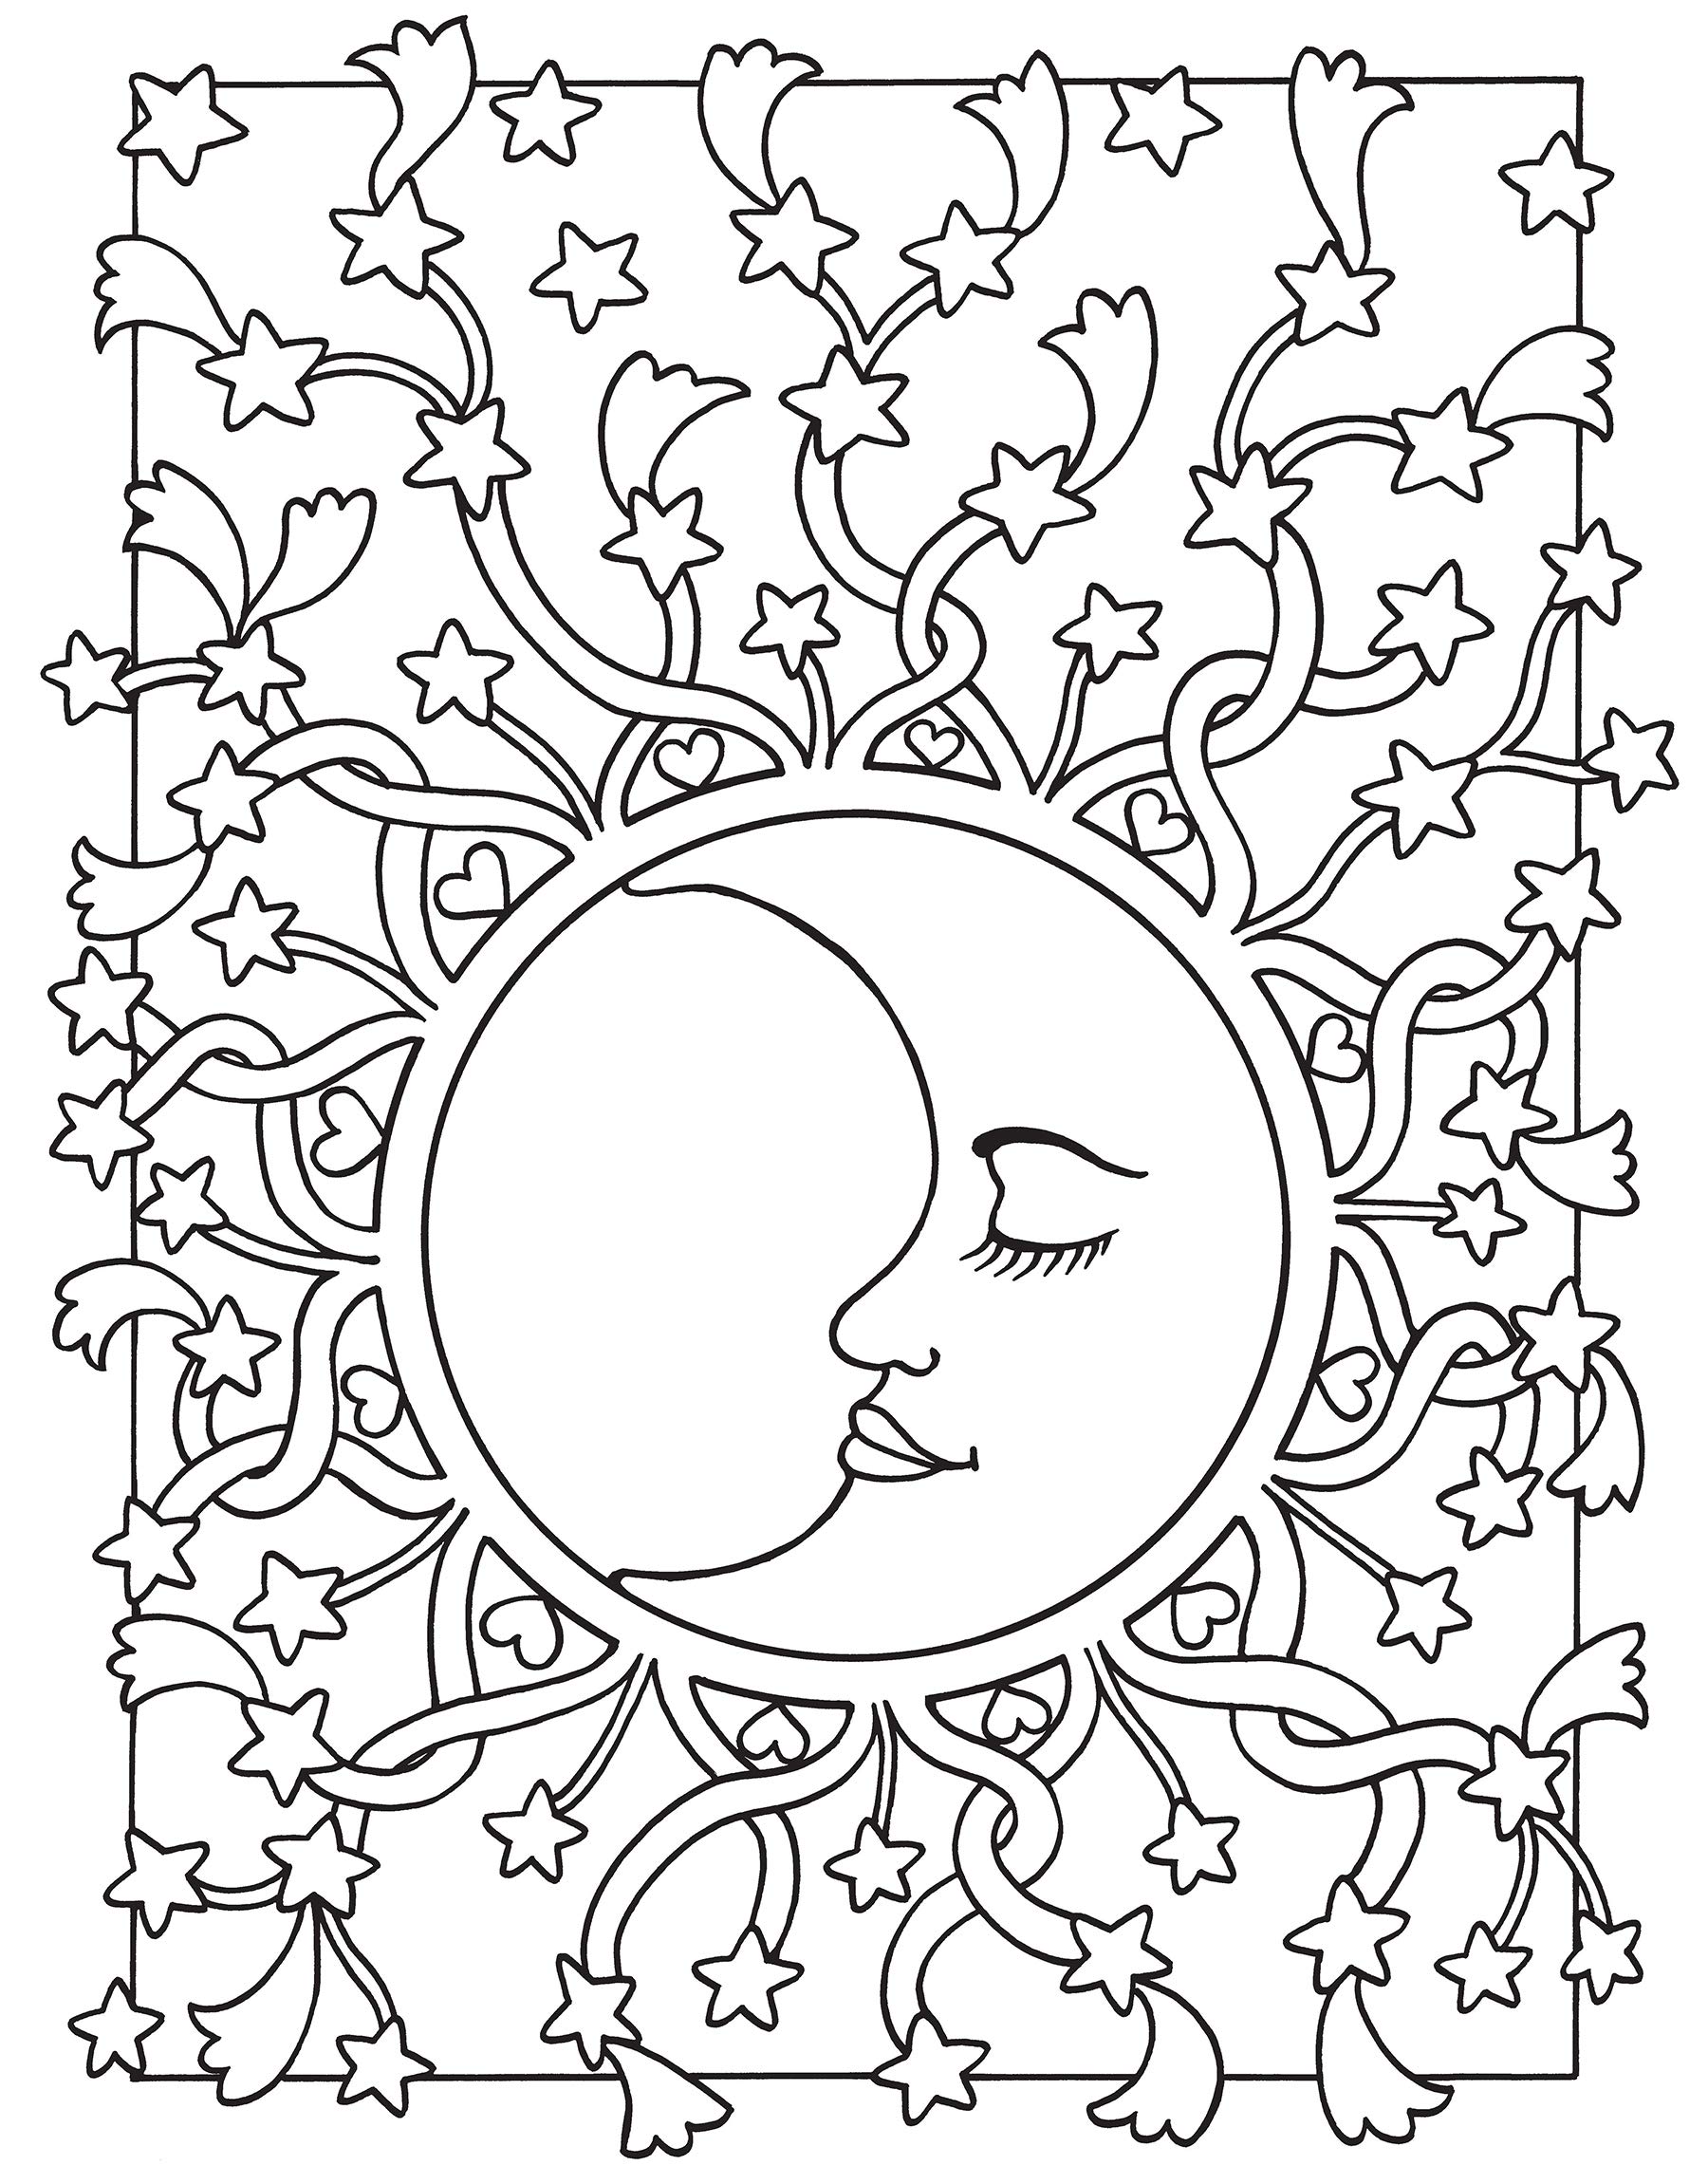 Full Moon And Stars Coloring Pages